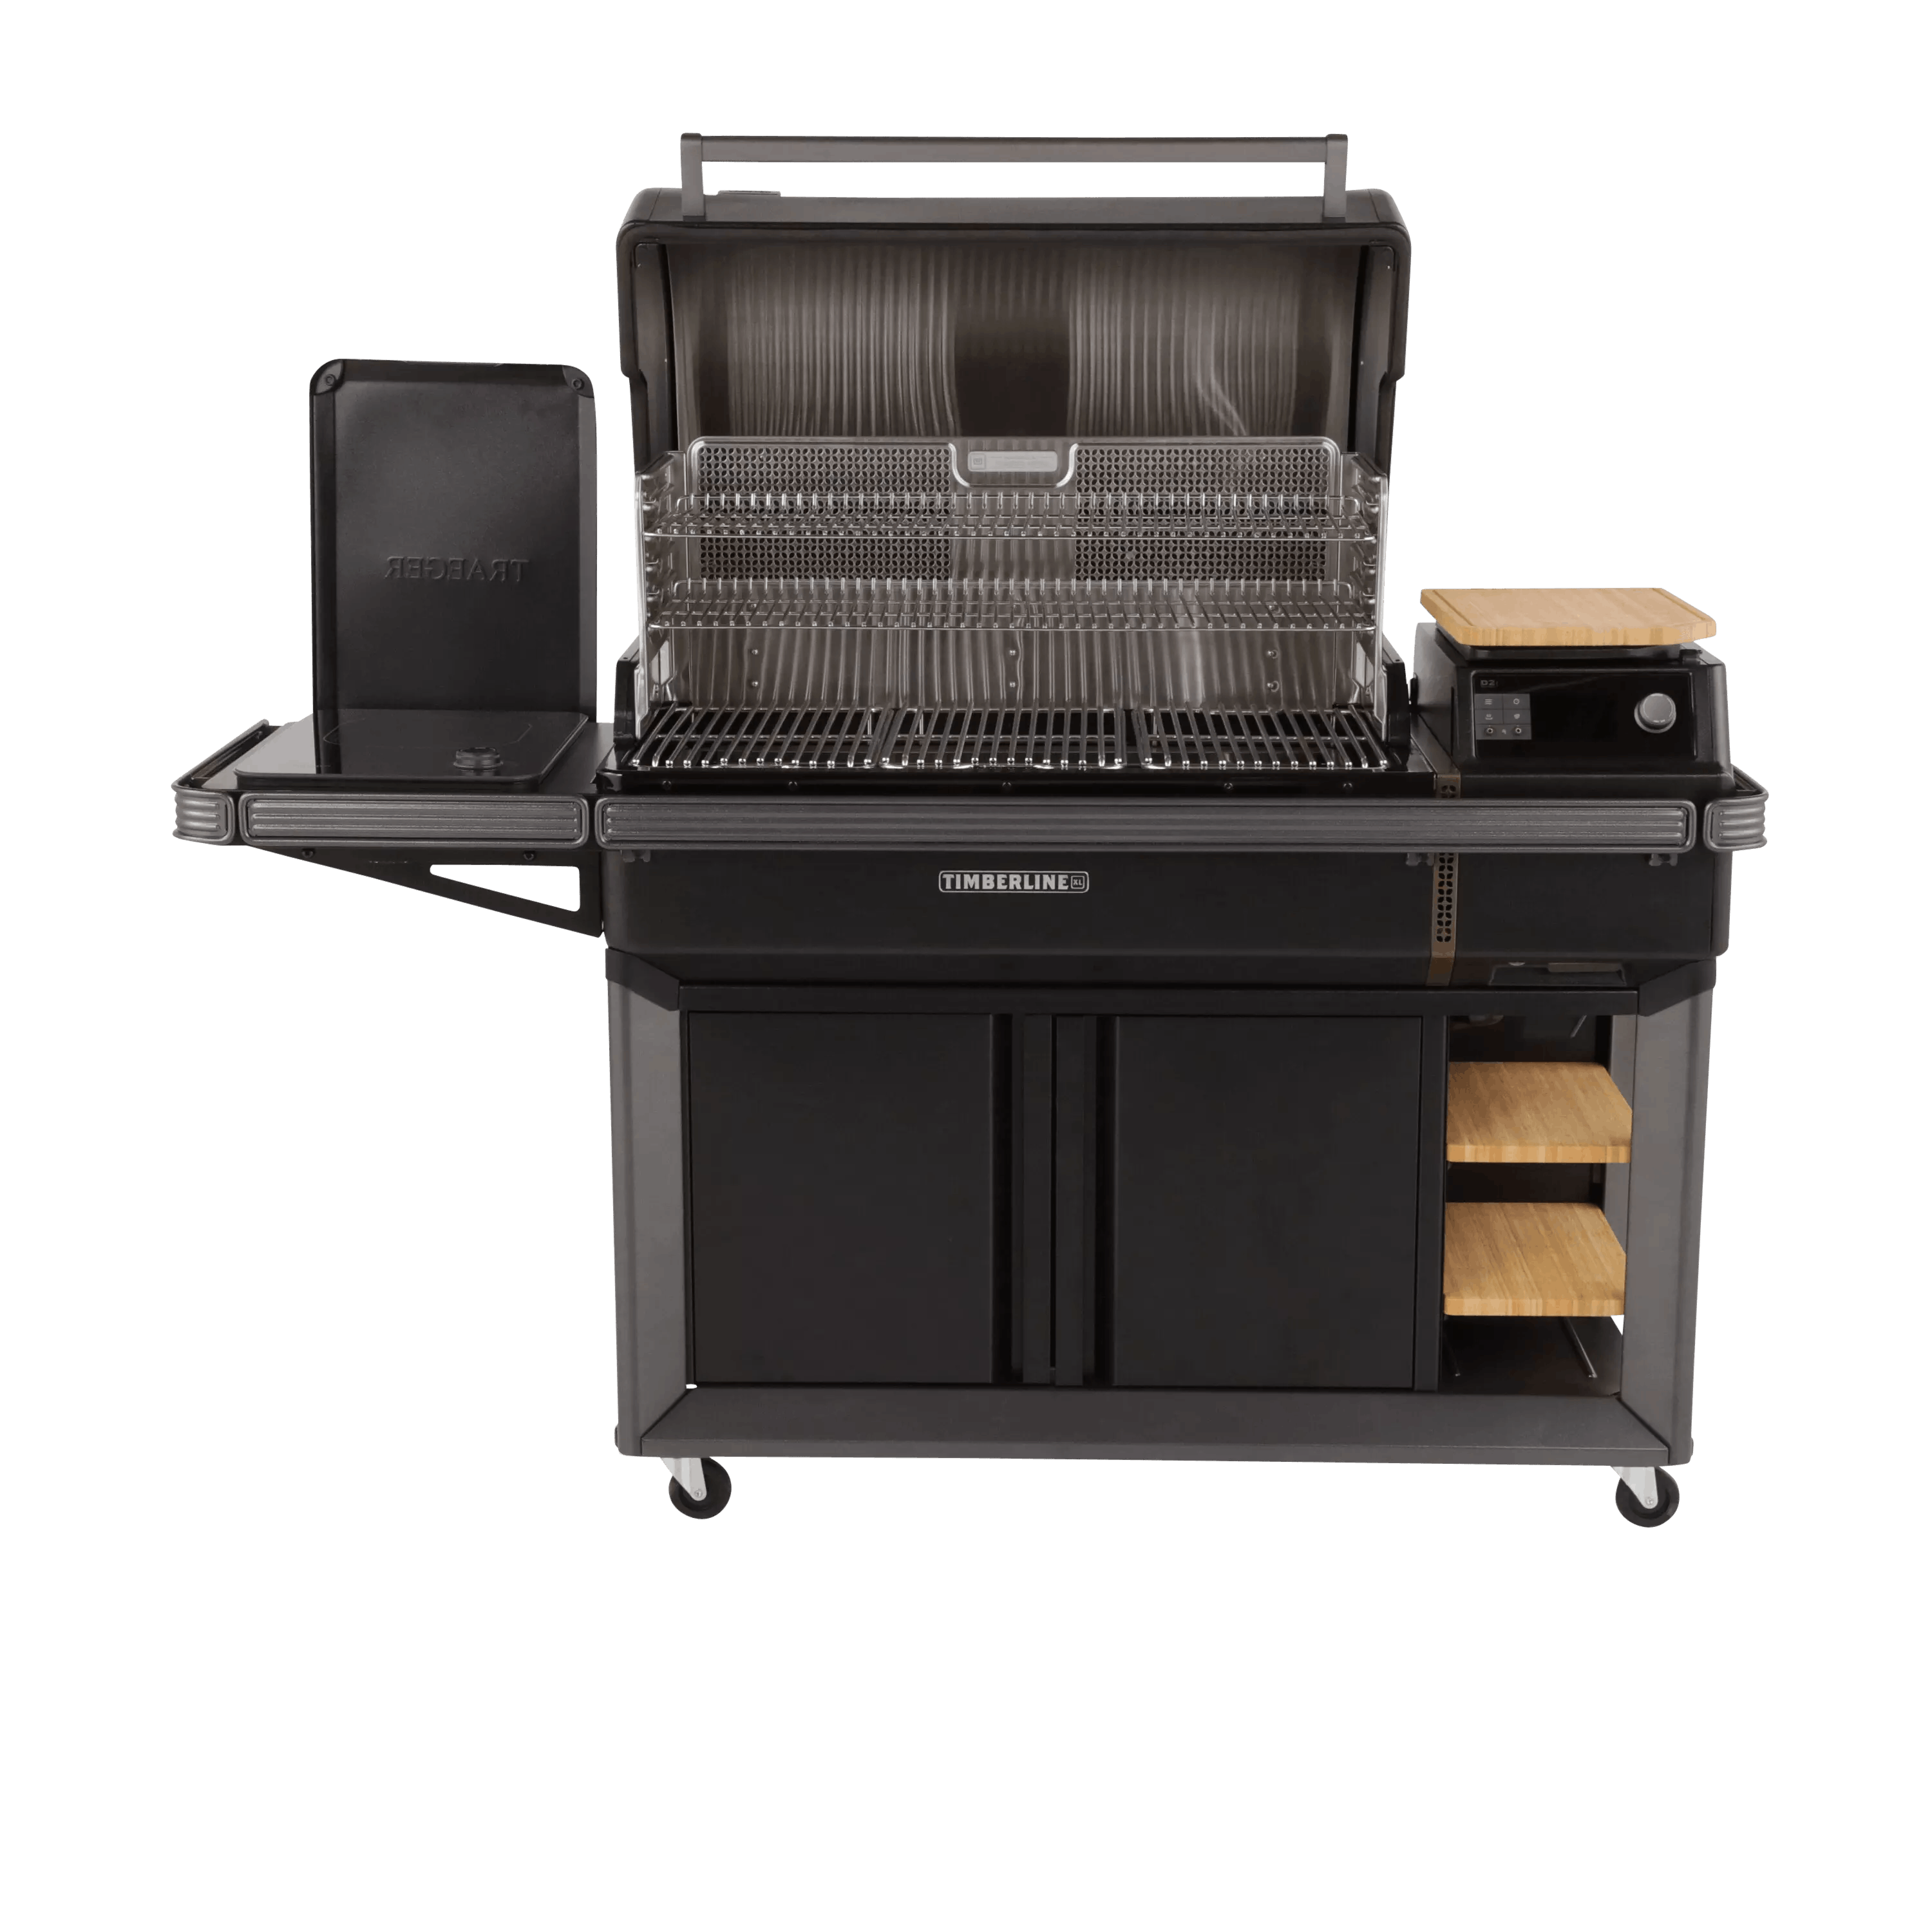 Traeger All-New Timberline Wi-Fi Controlled Wood Pellet Grill